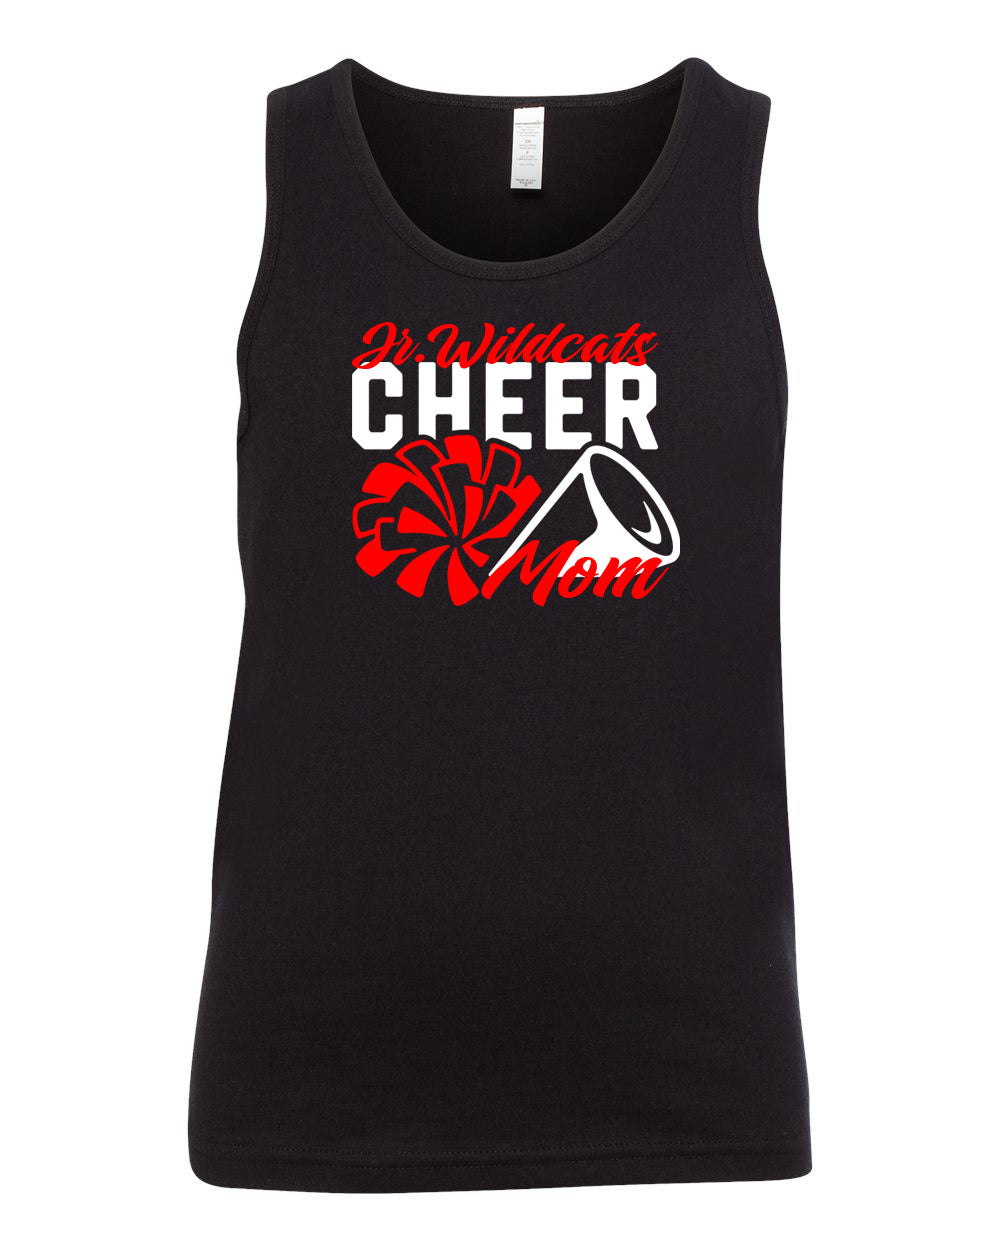 High Point Cheer design 4 Ladies Muscle Tank Top